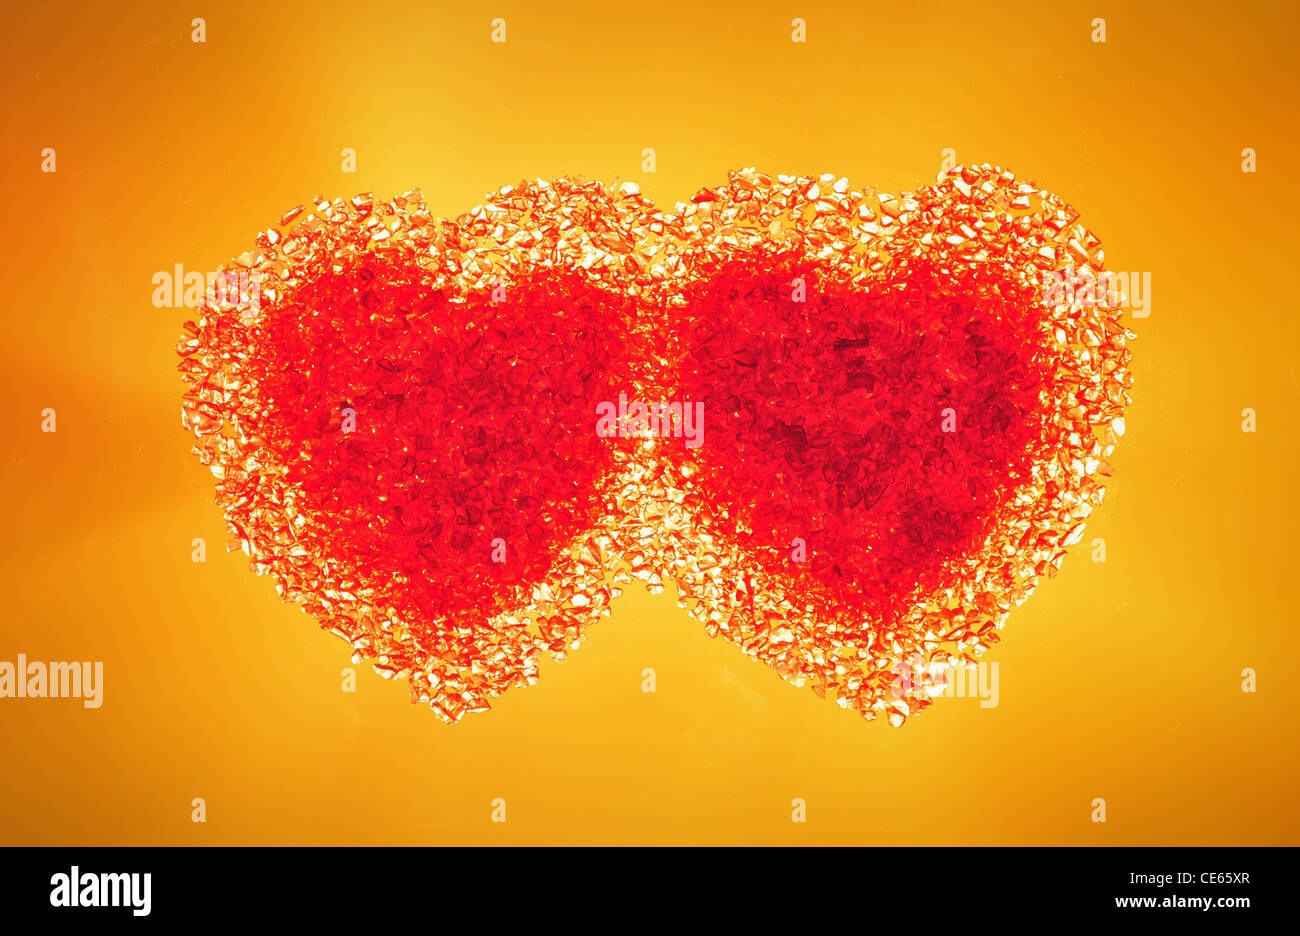 Two hot red hearts on a warm yellow background. Stock Photo